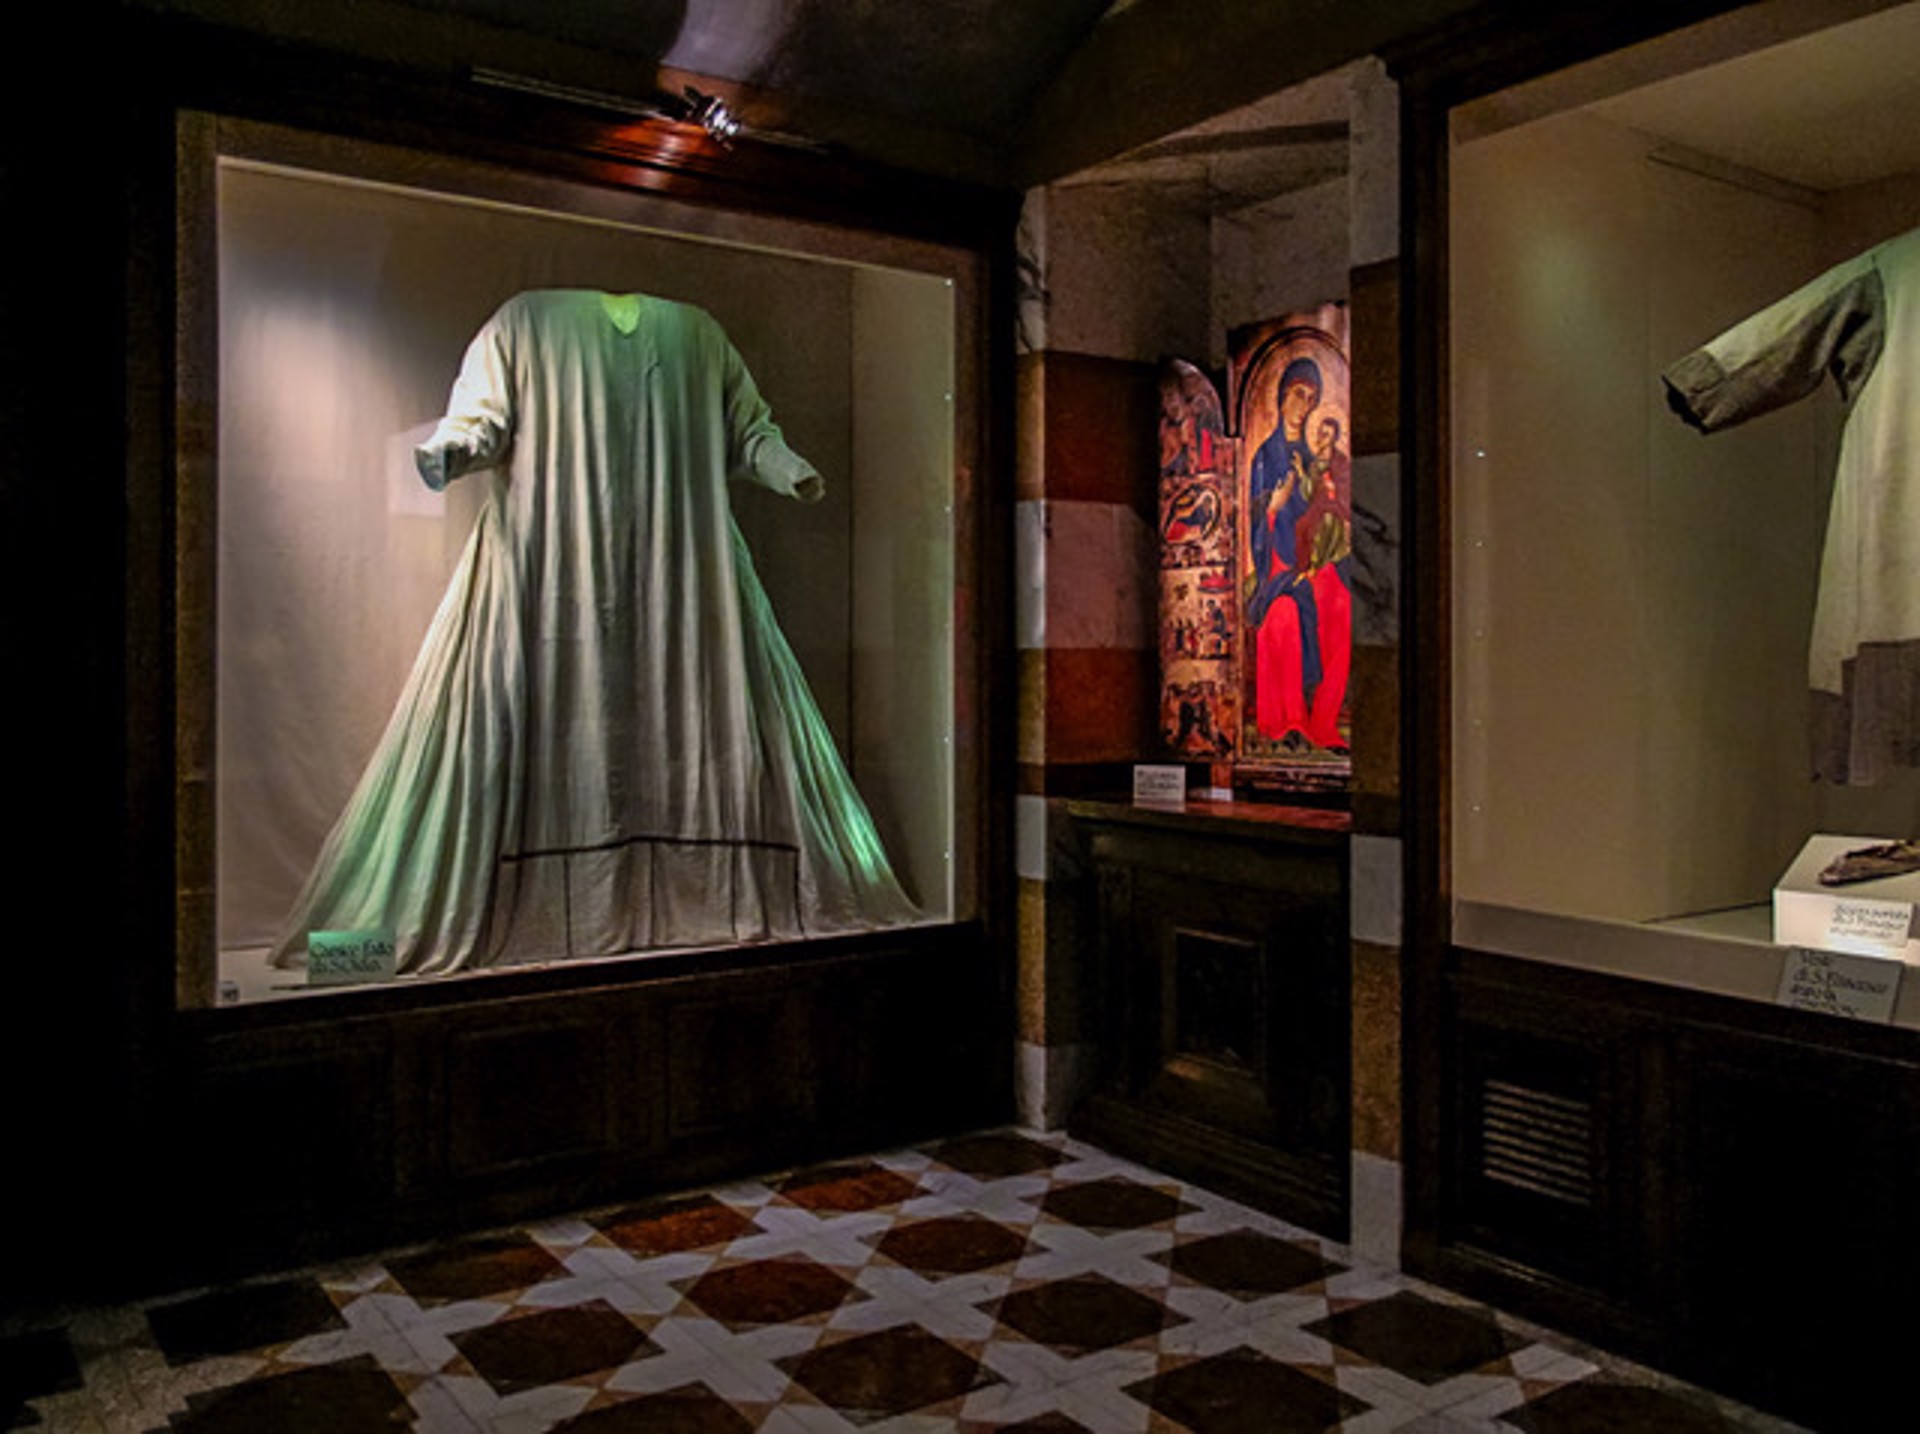 Saint Catherine of Siena Gown, Siena, Italy by Lawrence McFarland